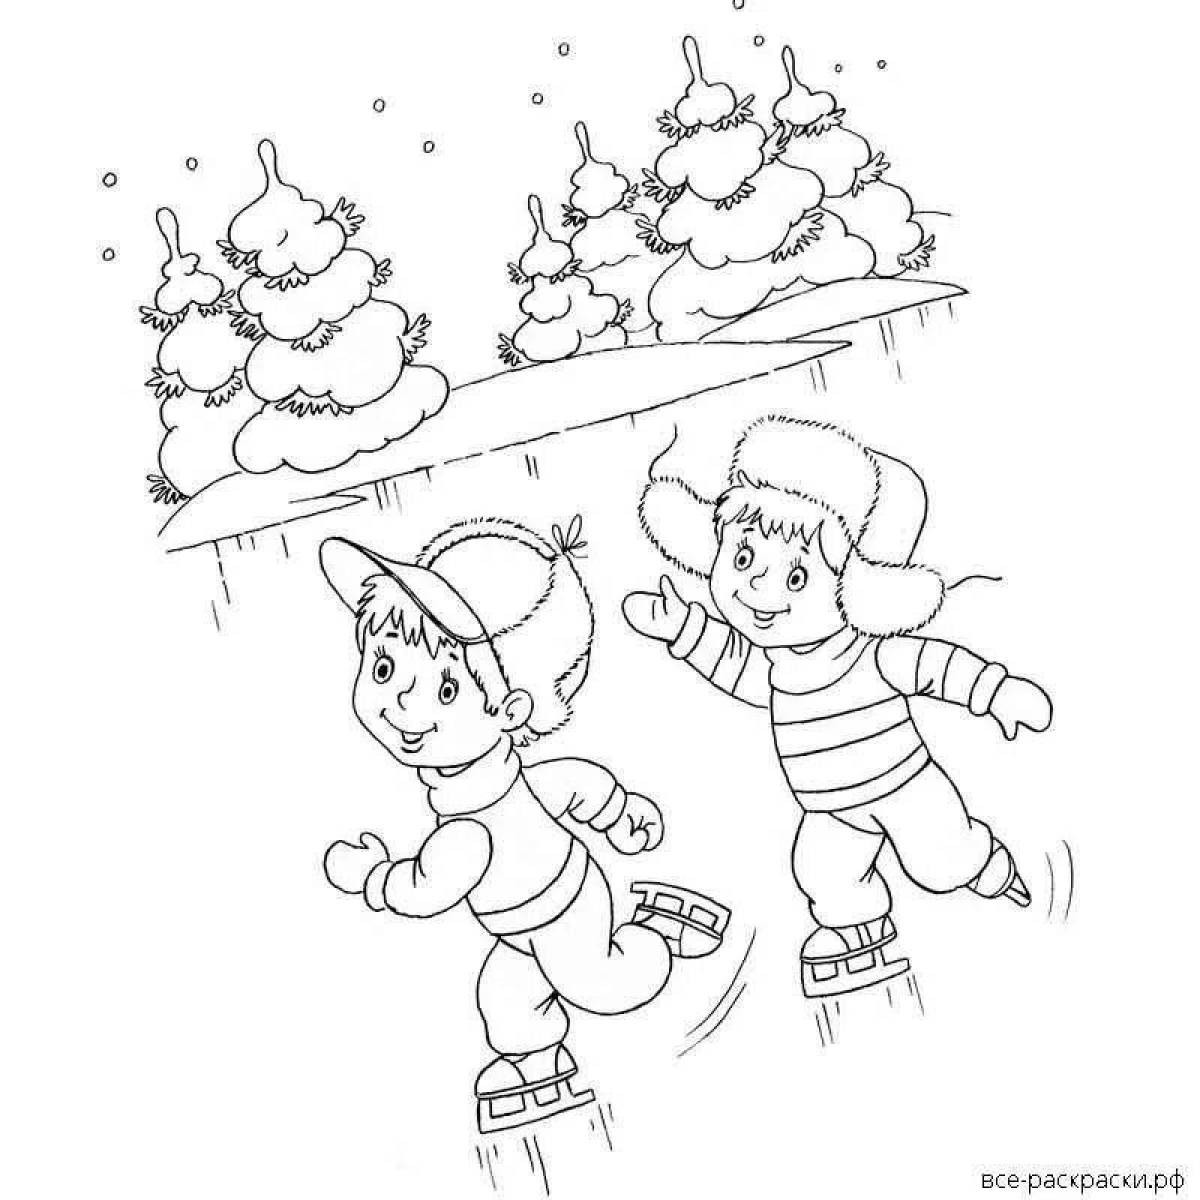 Amazing winter games coloring pages